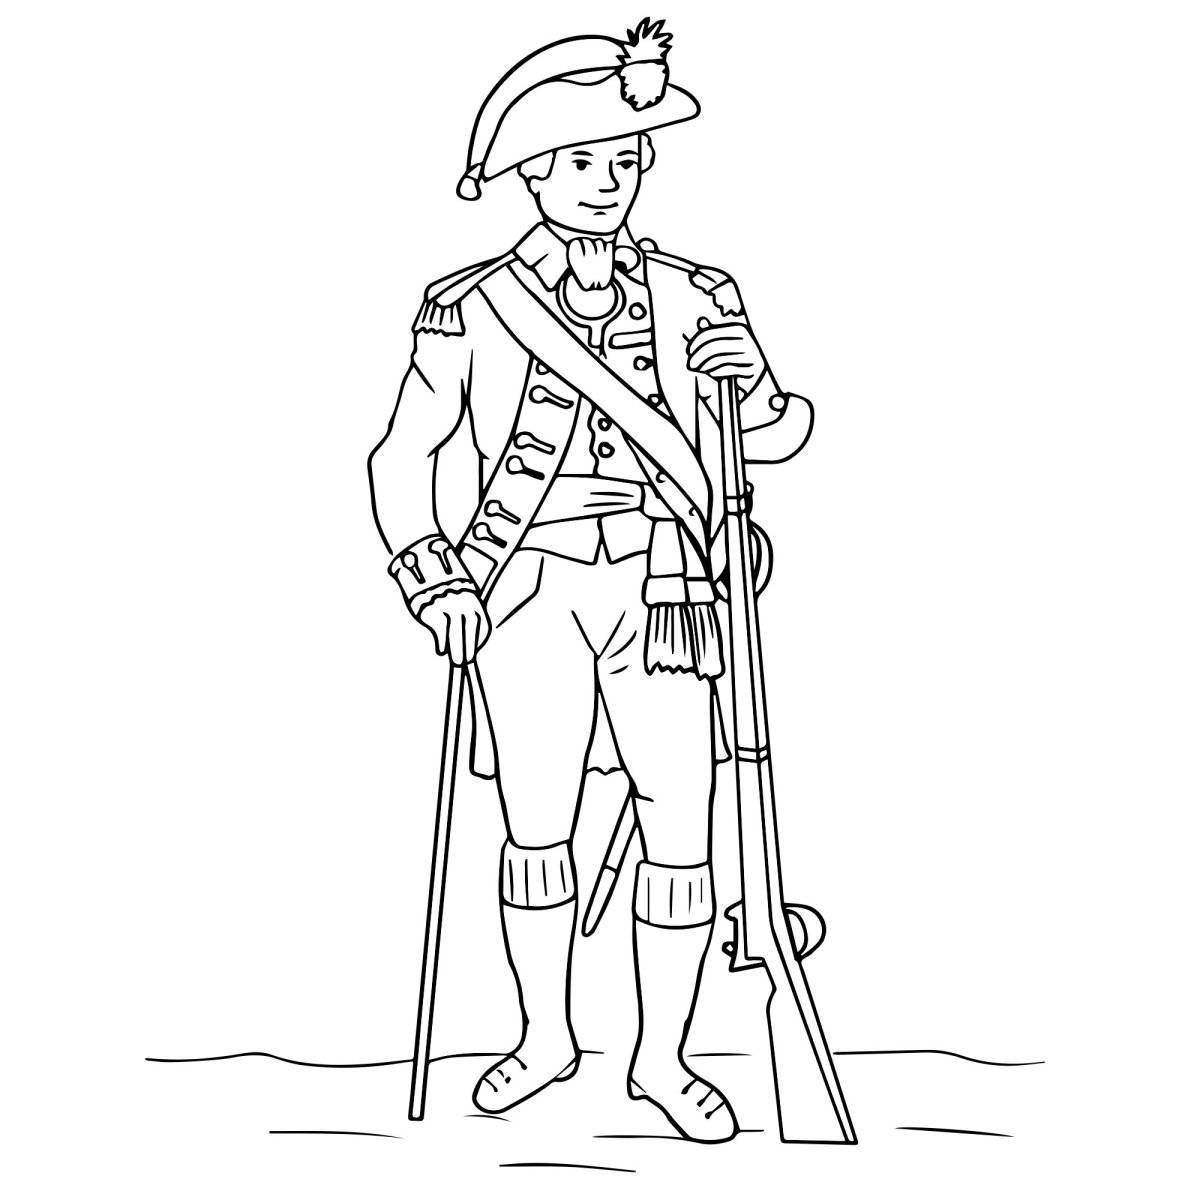 Glorious soldier coloring book for kids